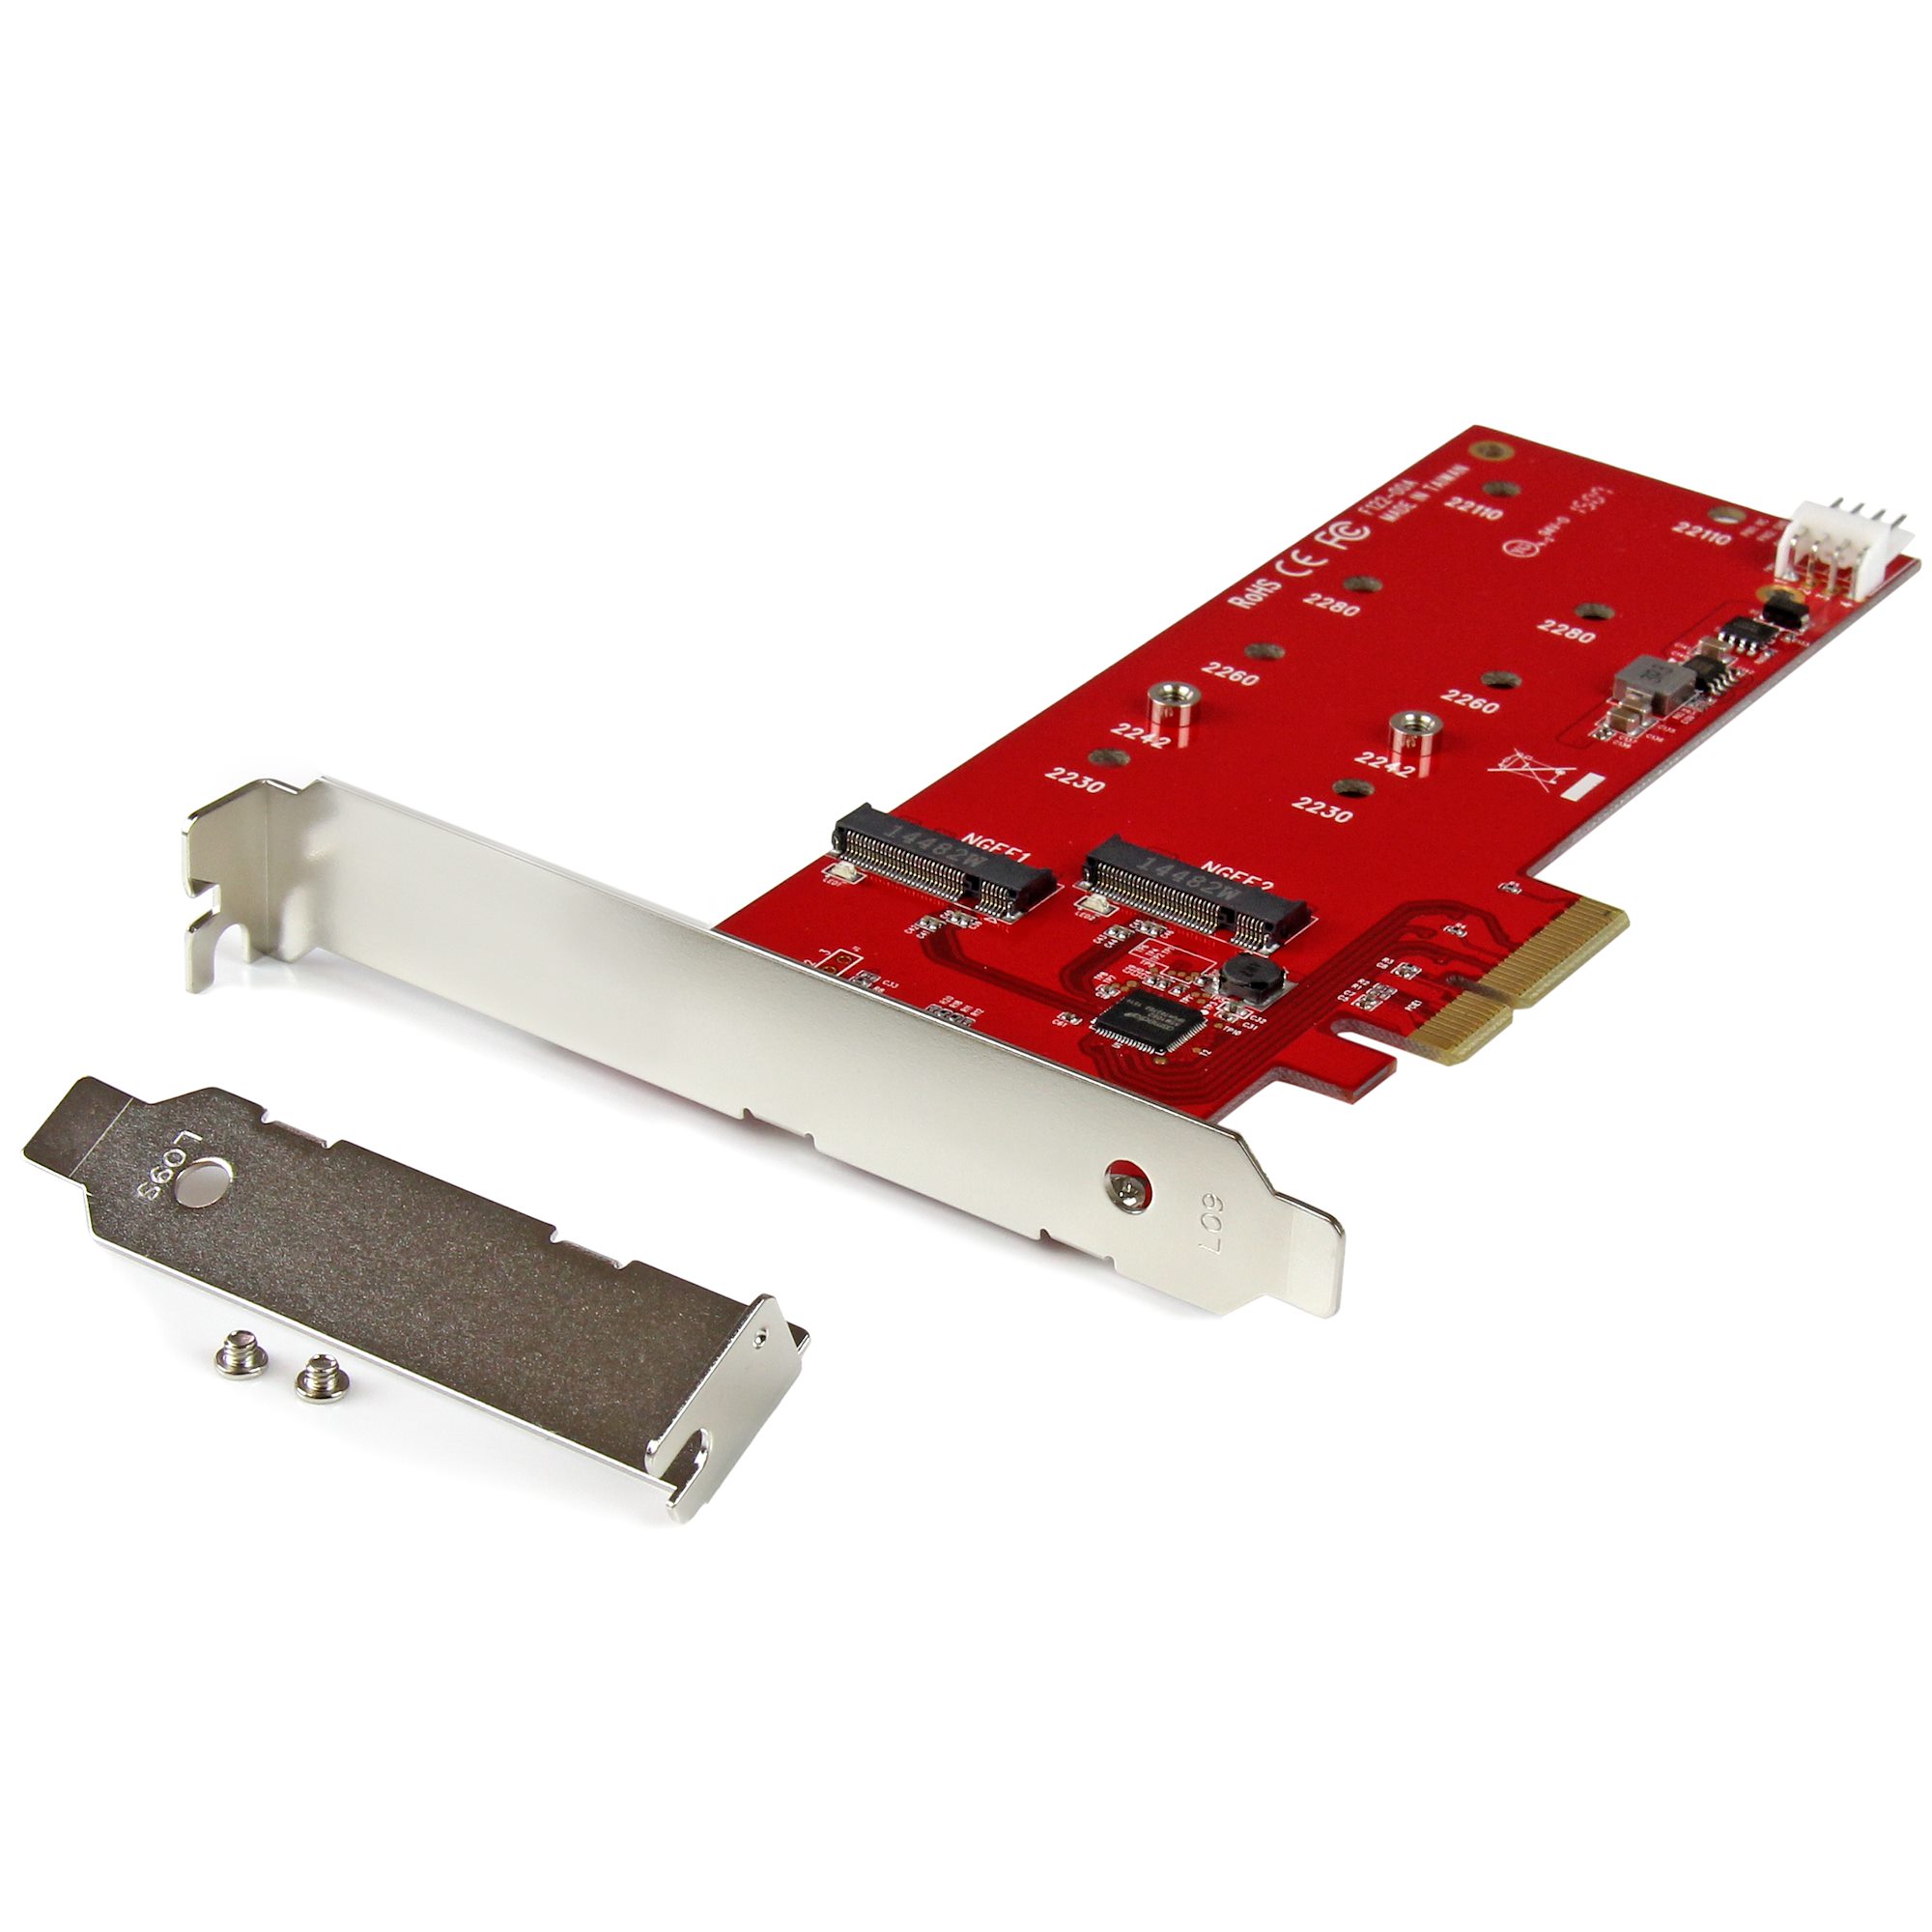 M.2 SATA SSD to 2.5in SATA Adapter - M.2 NGFF to SATA Converter - 7mm -  Open-Frame Bracket - M2 Hard Drive Adapter